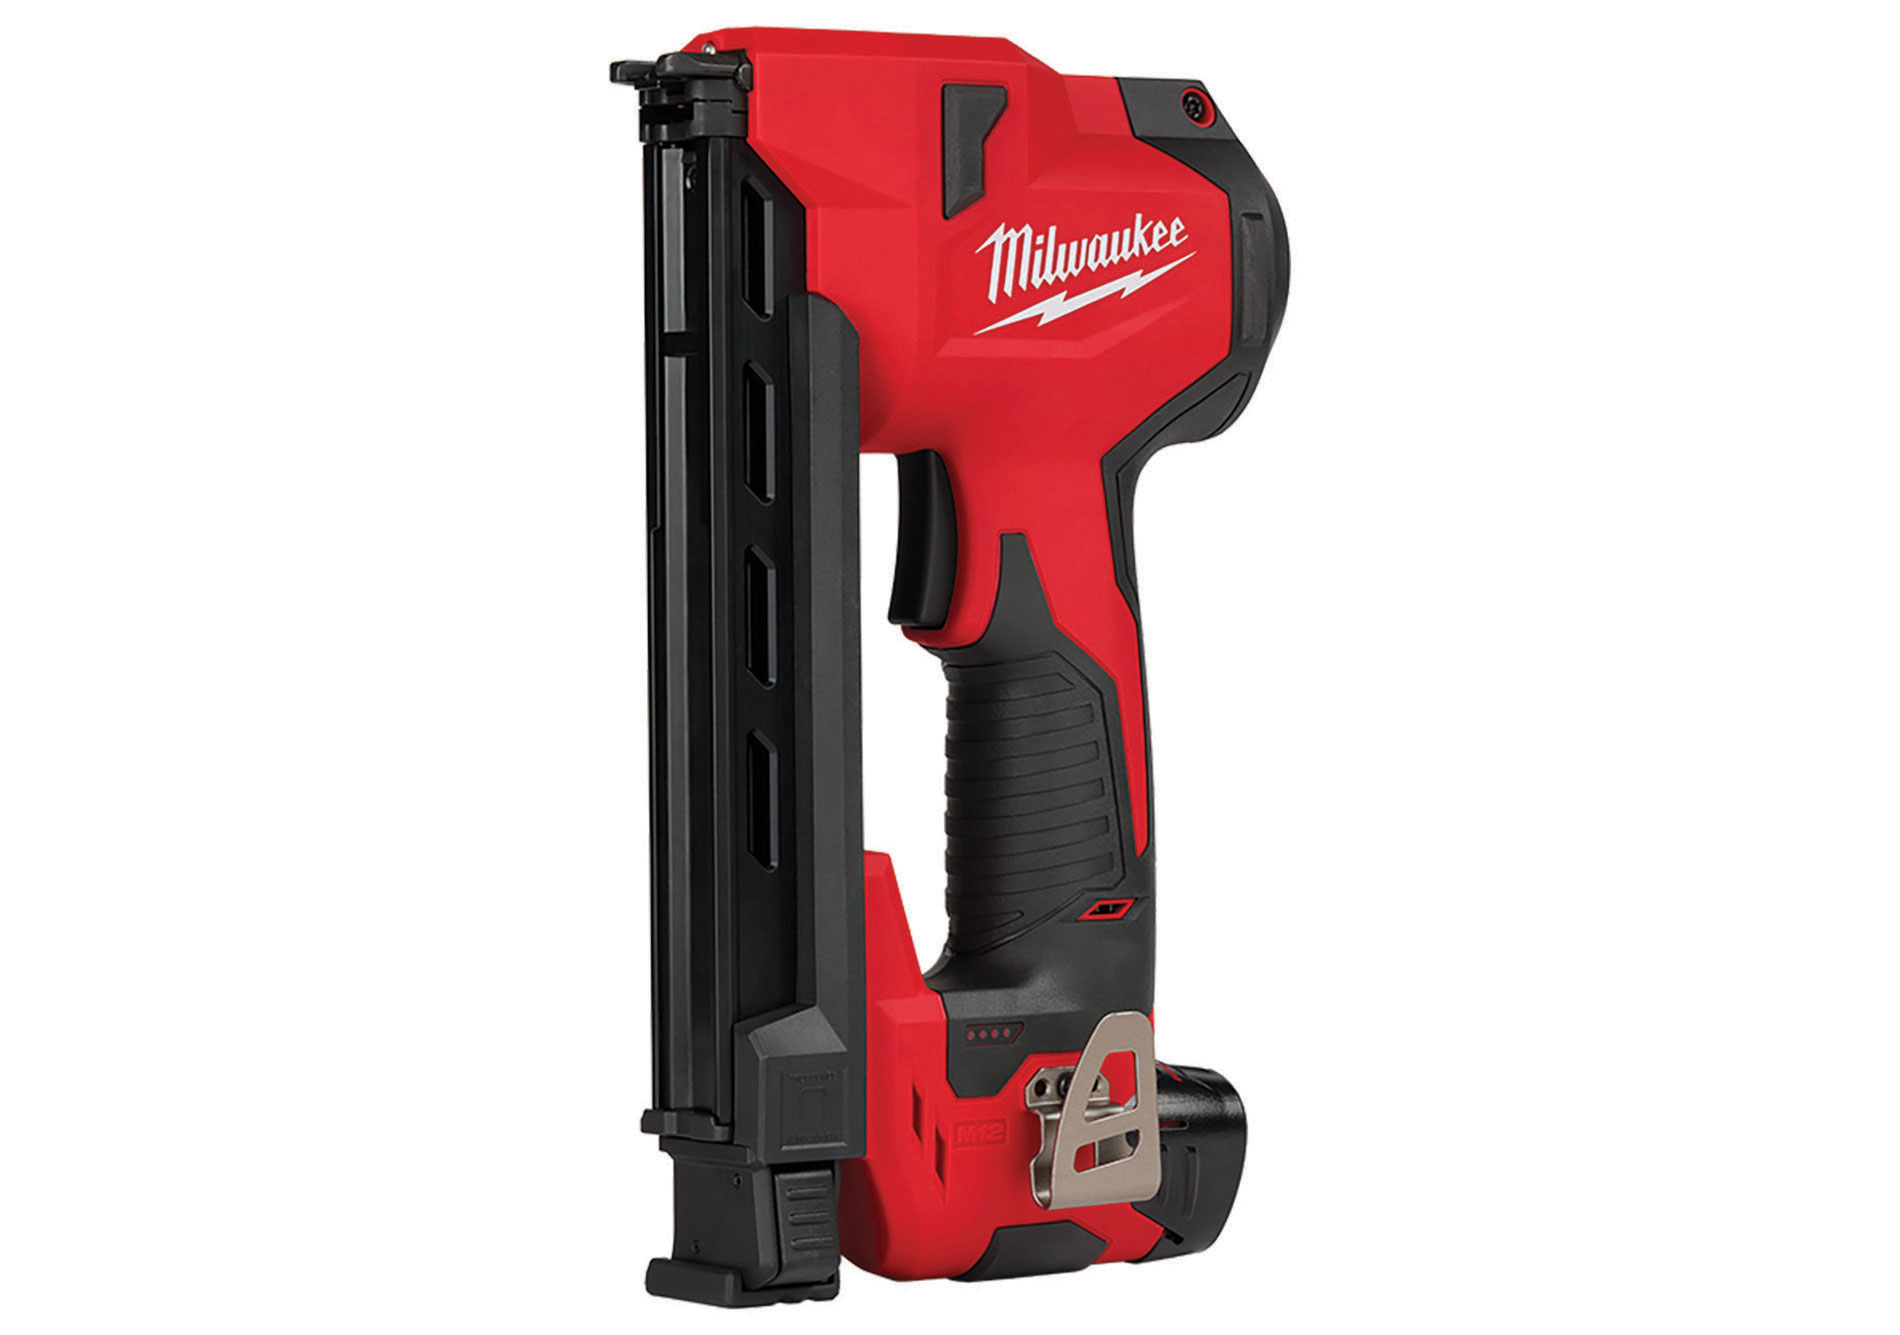 Black and red cable stapler with "Milwaukee" logo. Image by Milwaukee Tool Corp.